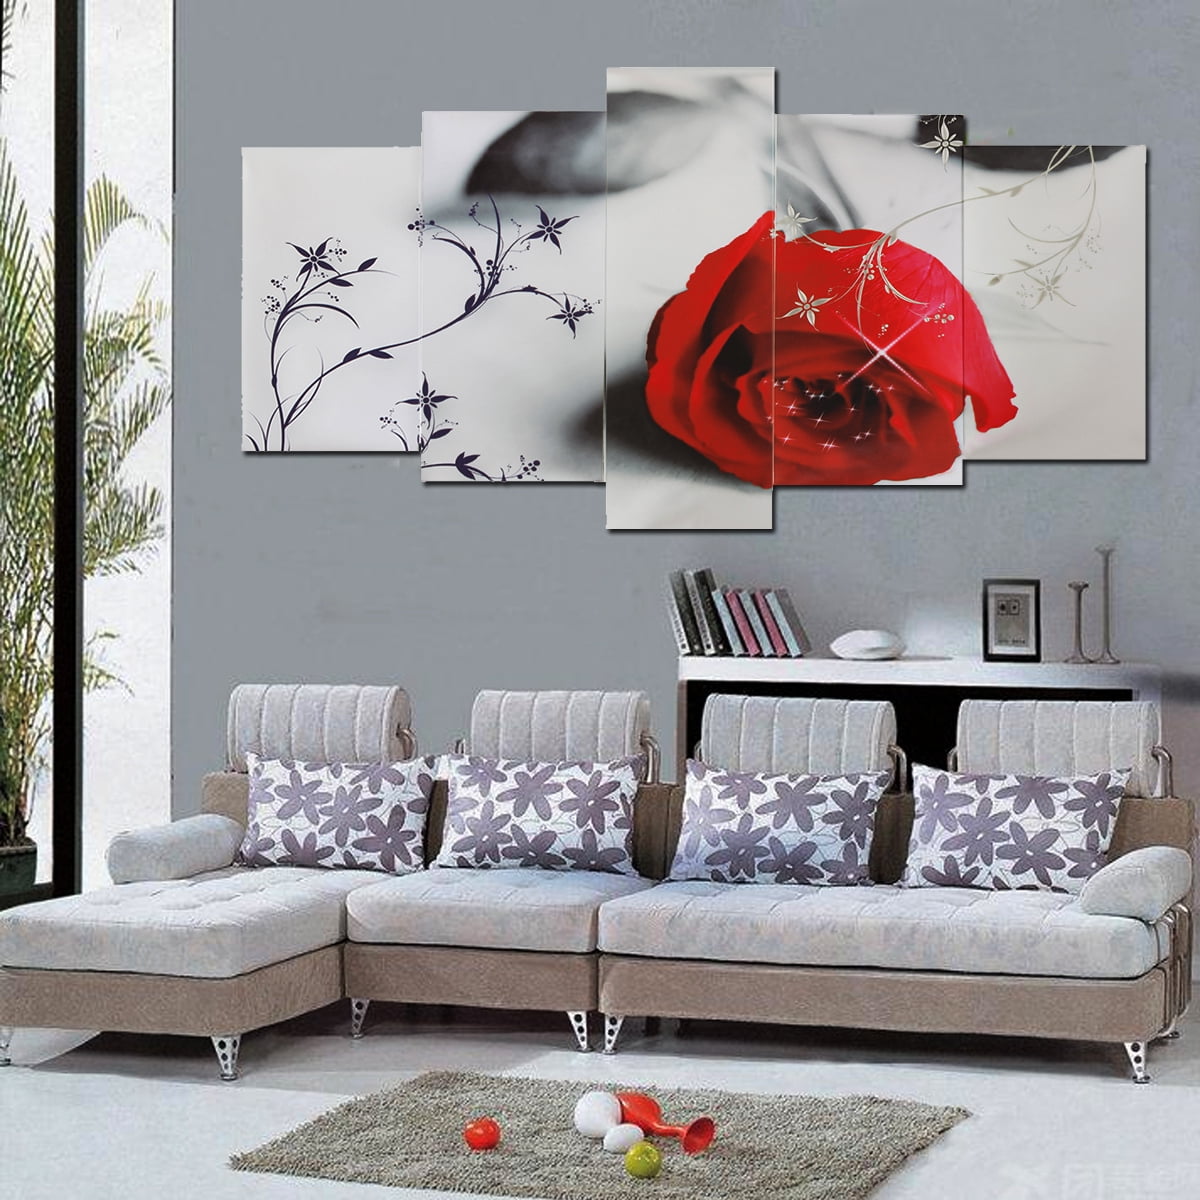 Red Poppy Rose Flower Canvas Print Art Painting Picture Home Hallway Wall Decor